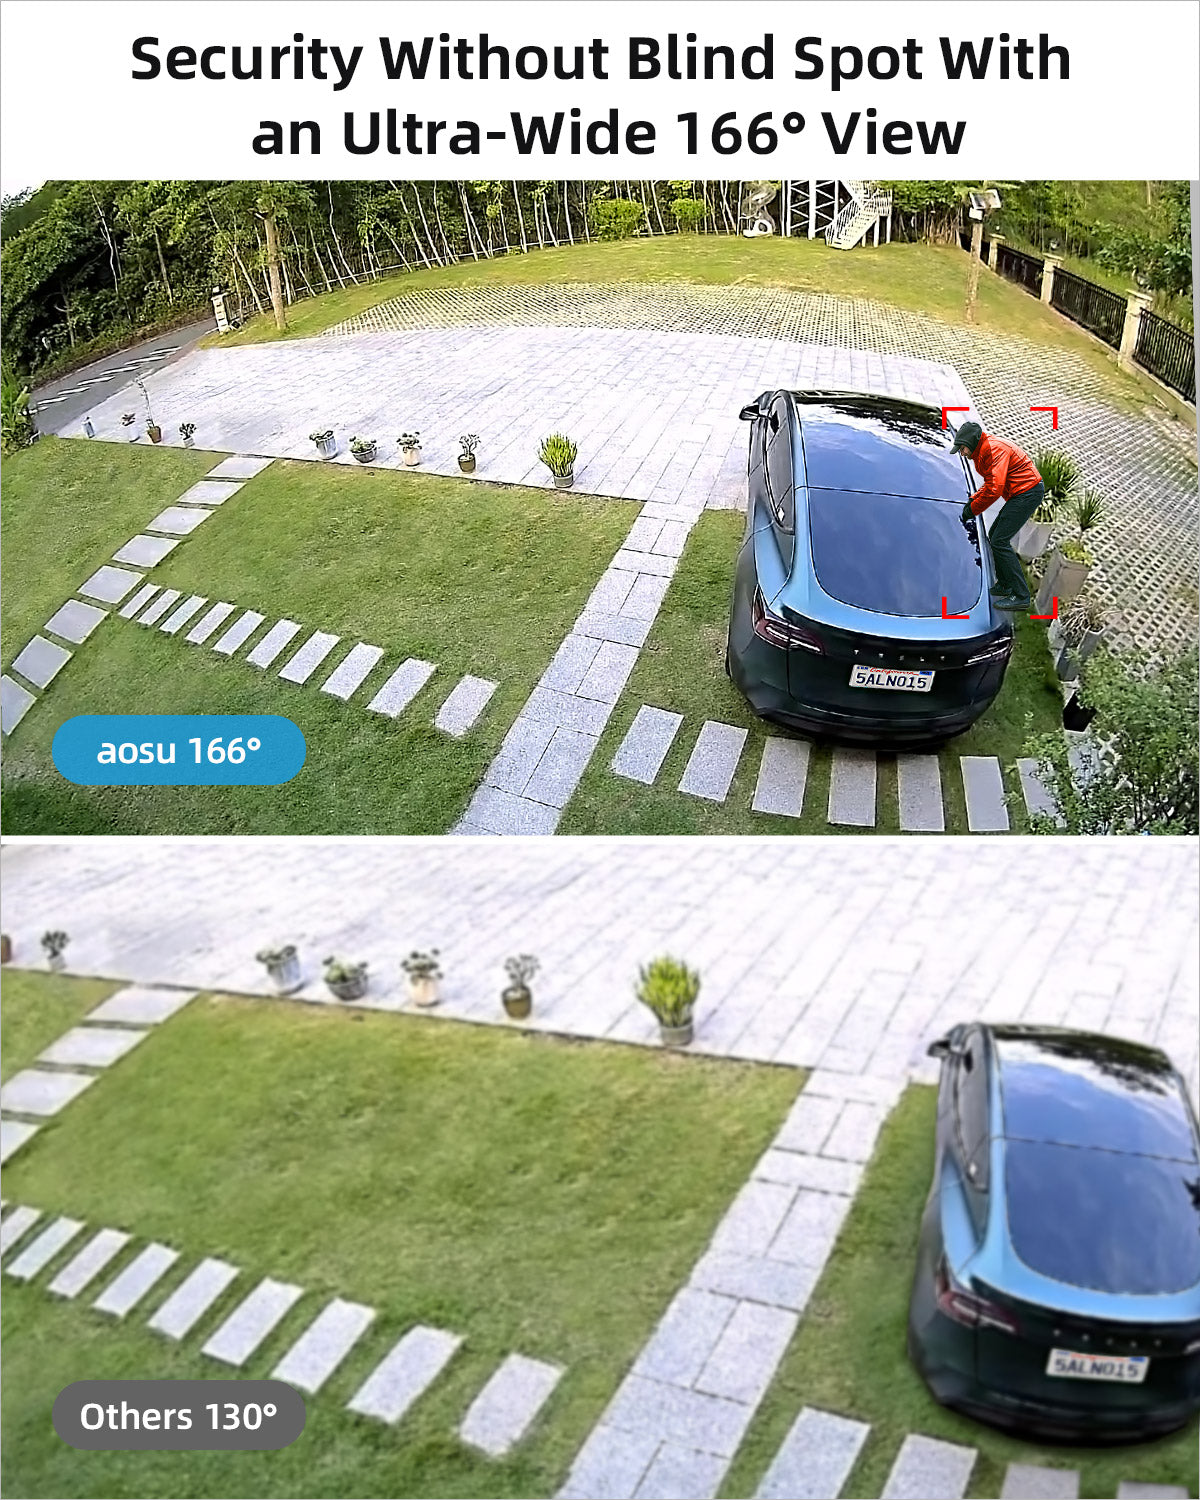 Security without blind spot with an ultra-wide 166 degree view